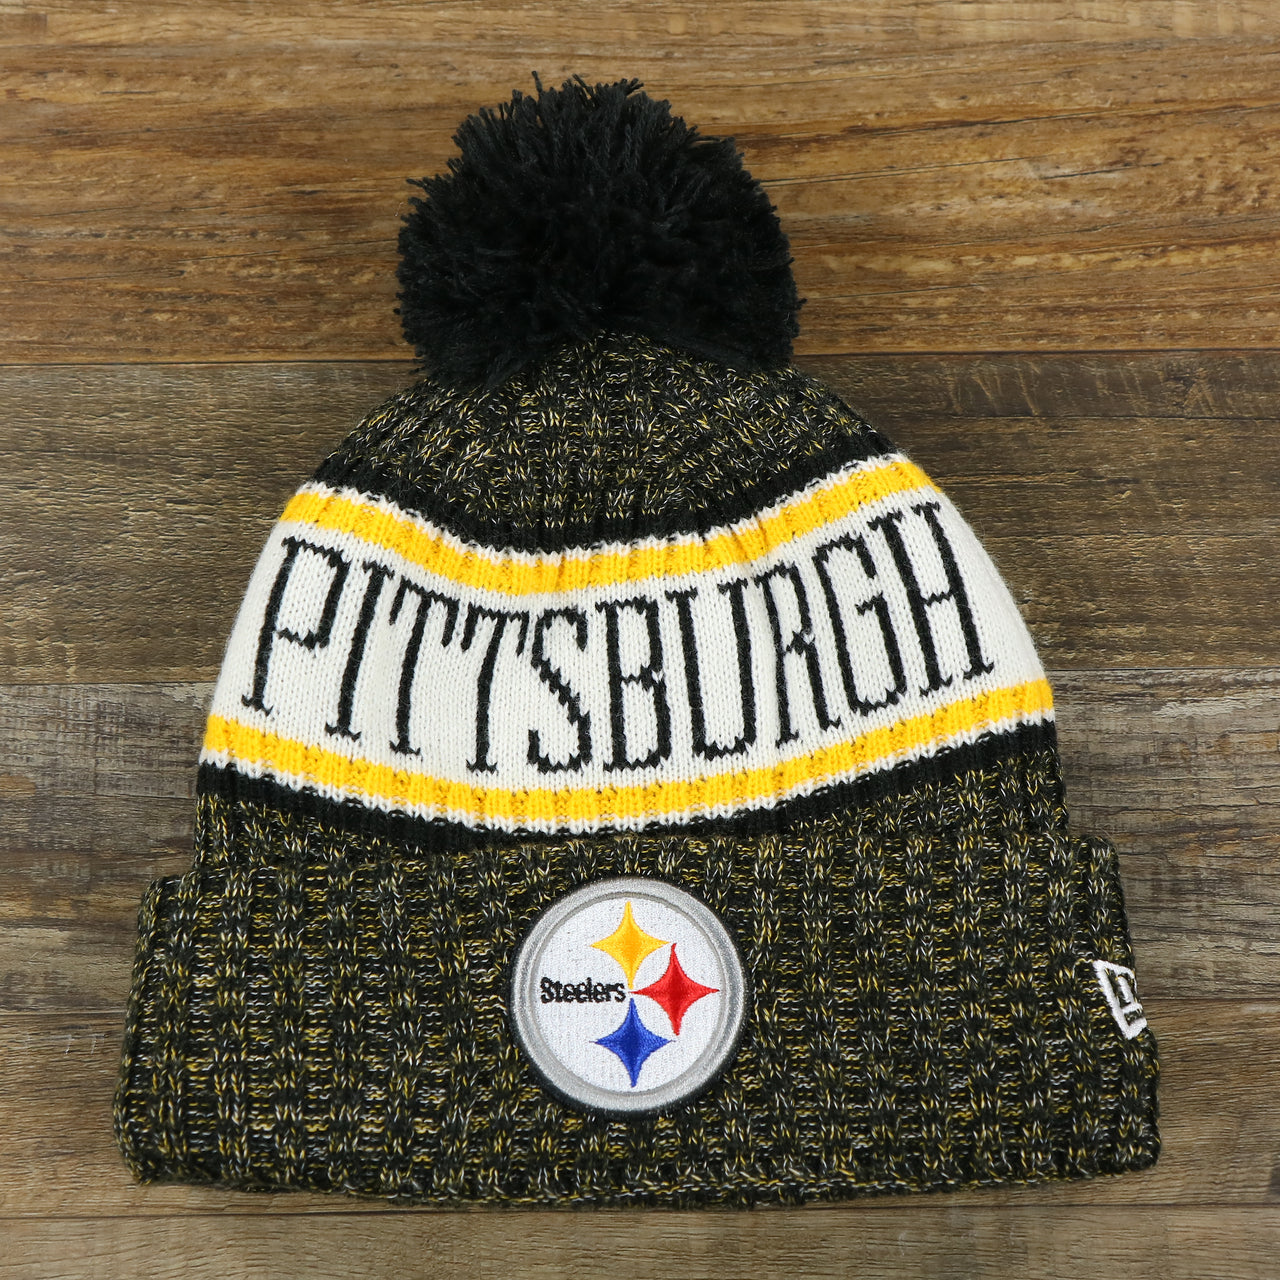 The front of the Pittsburgh Steelers On Field Cold Weather Striped Wordmark Pom Pom Winter Beanie | Black and Yellow Beanie